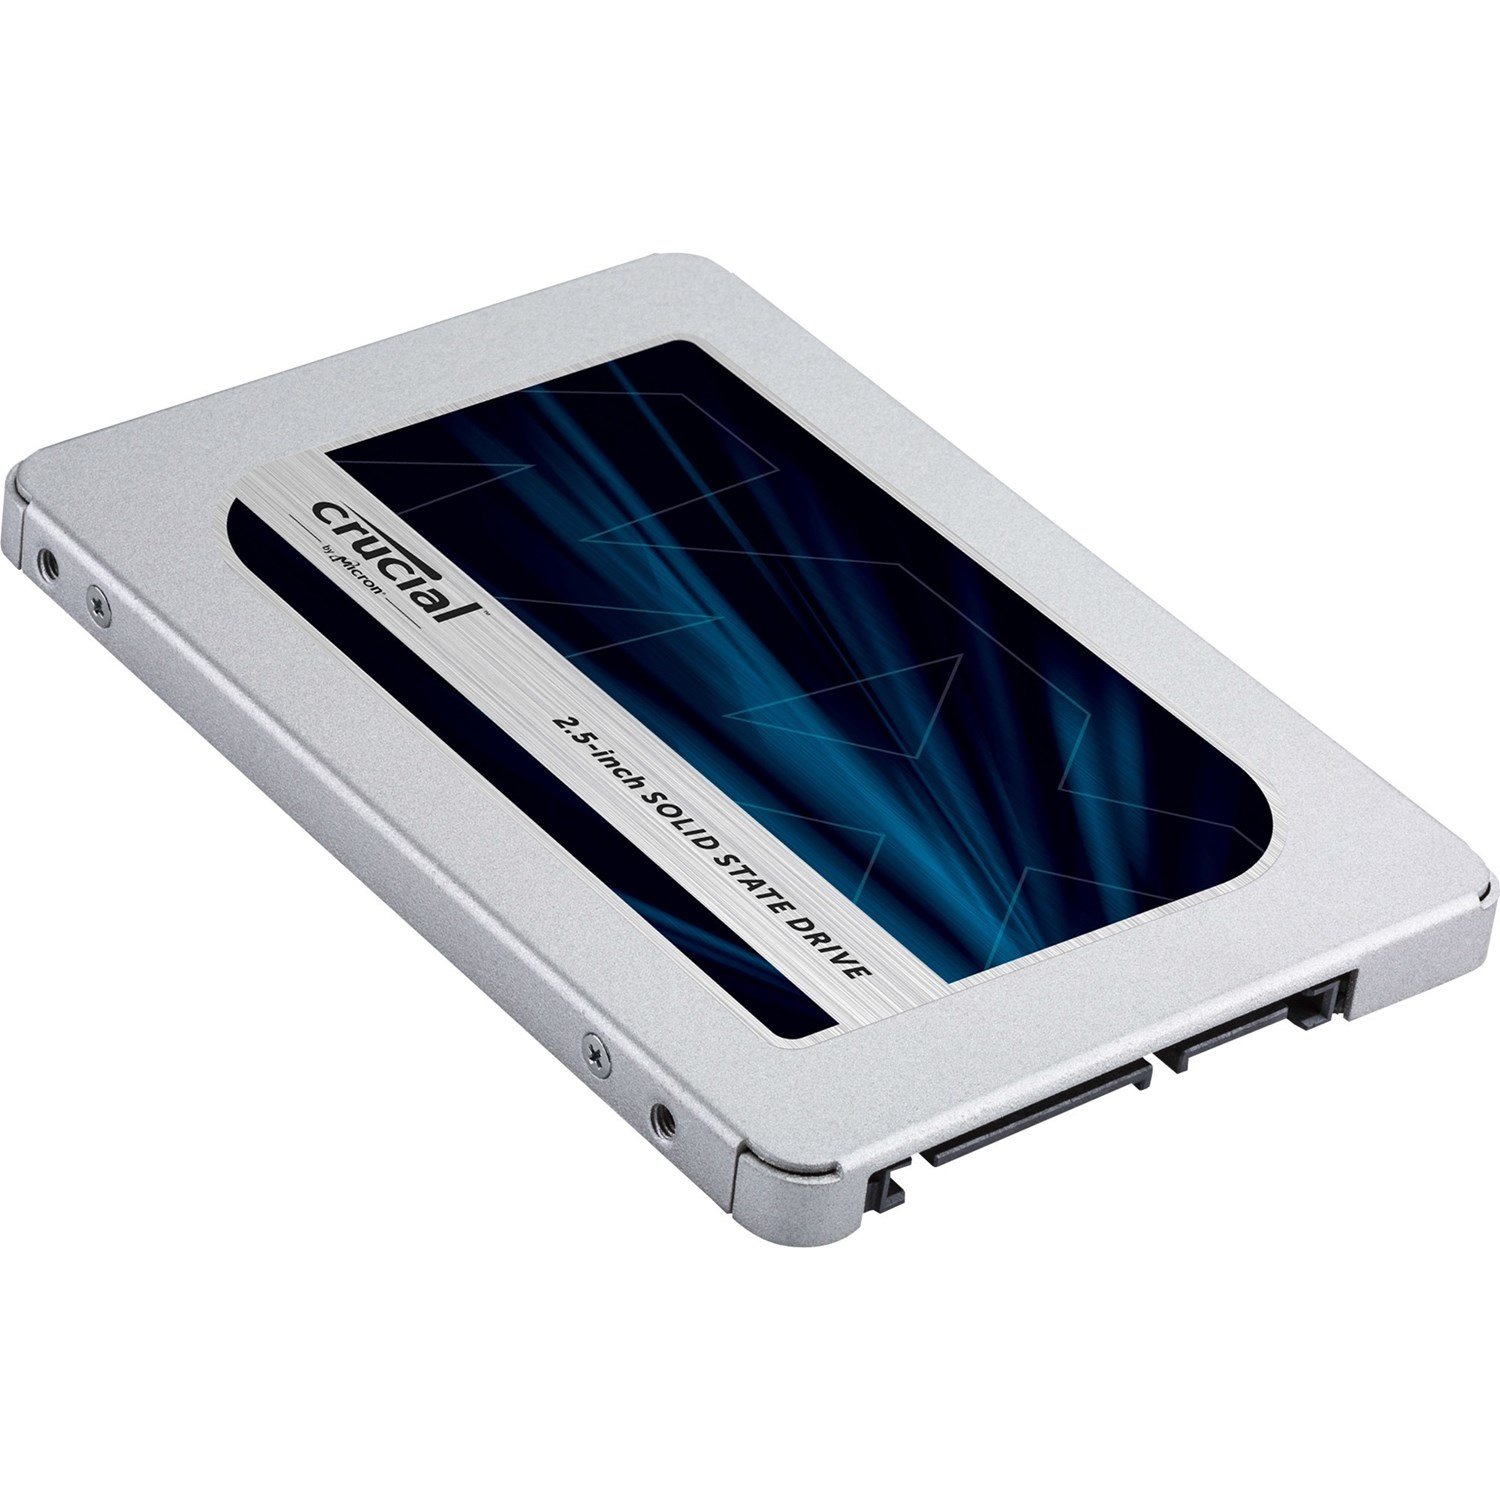 Crucial MX500 500GB 2.5' Sata SSD - 3D TLC 560/510 MB/s 90/95K Iops Acronis True Image Cloning Software 5YR WTY 7MM W/9.5MM Spacer